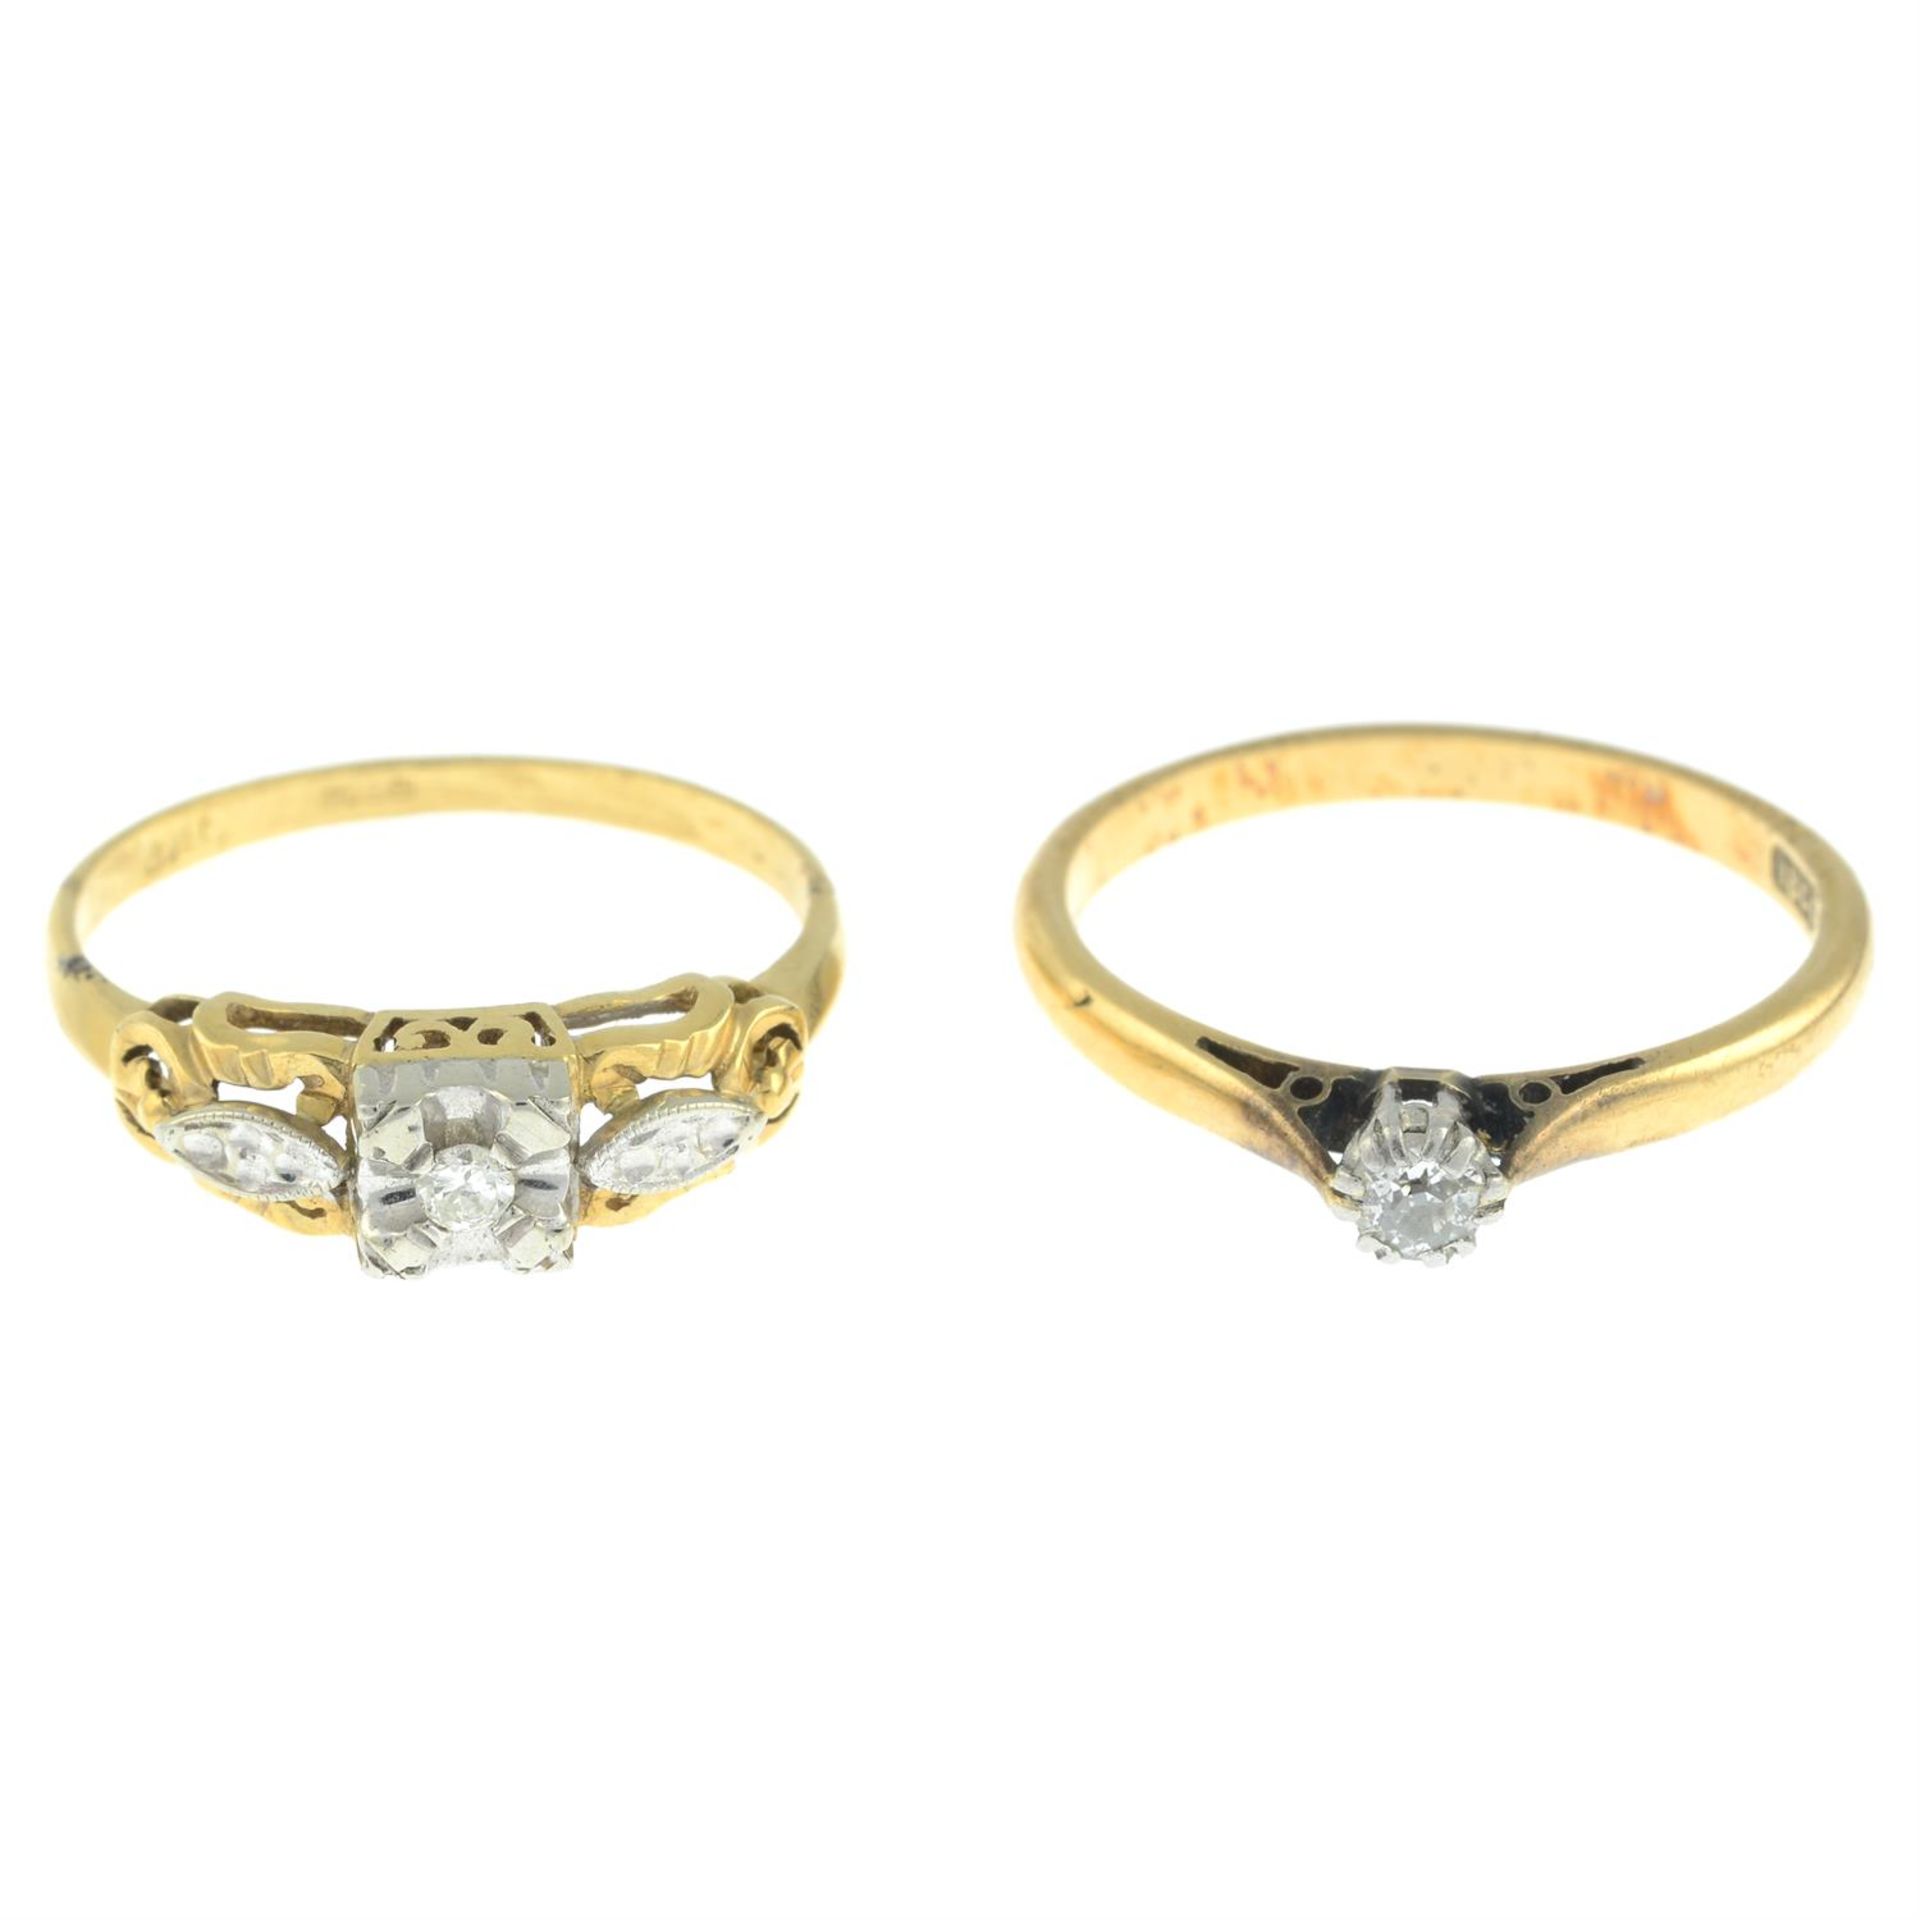 A mid 20th century 18ct gold and platinum old-cut diamond single-stone ring and an 18ct gold